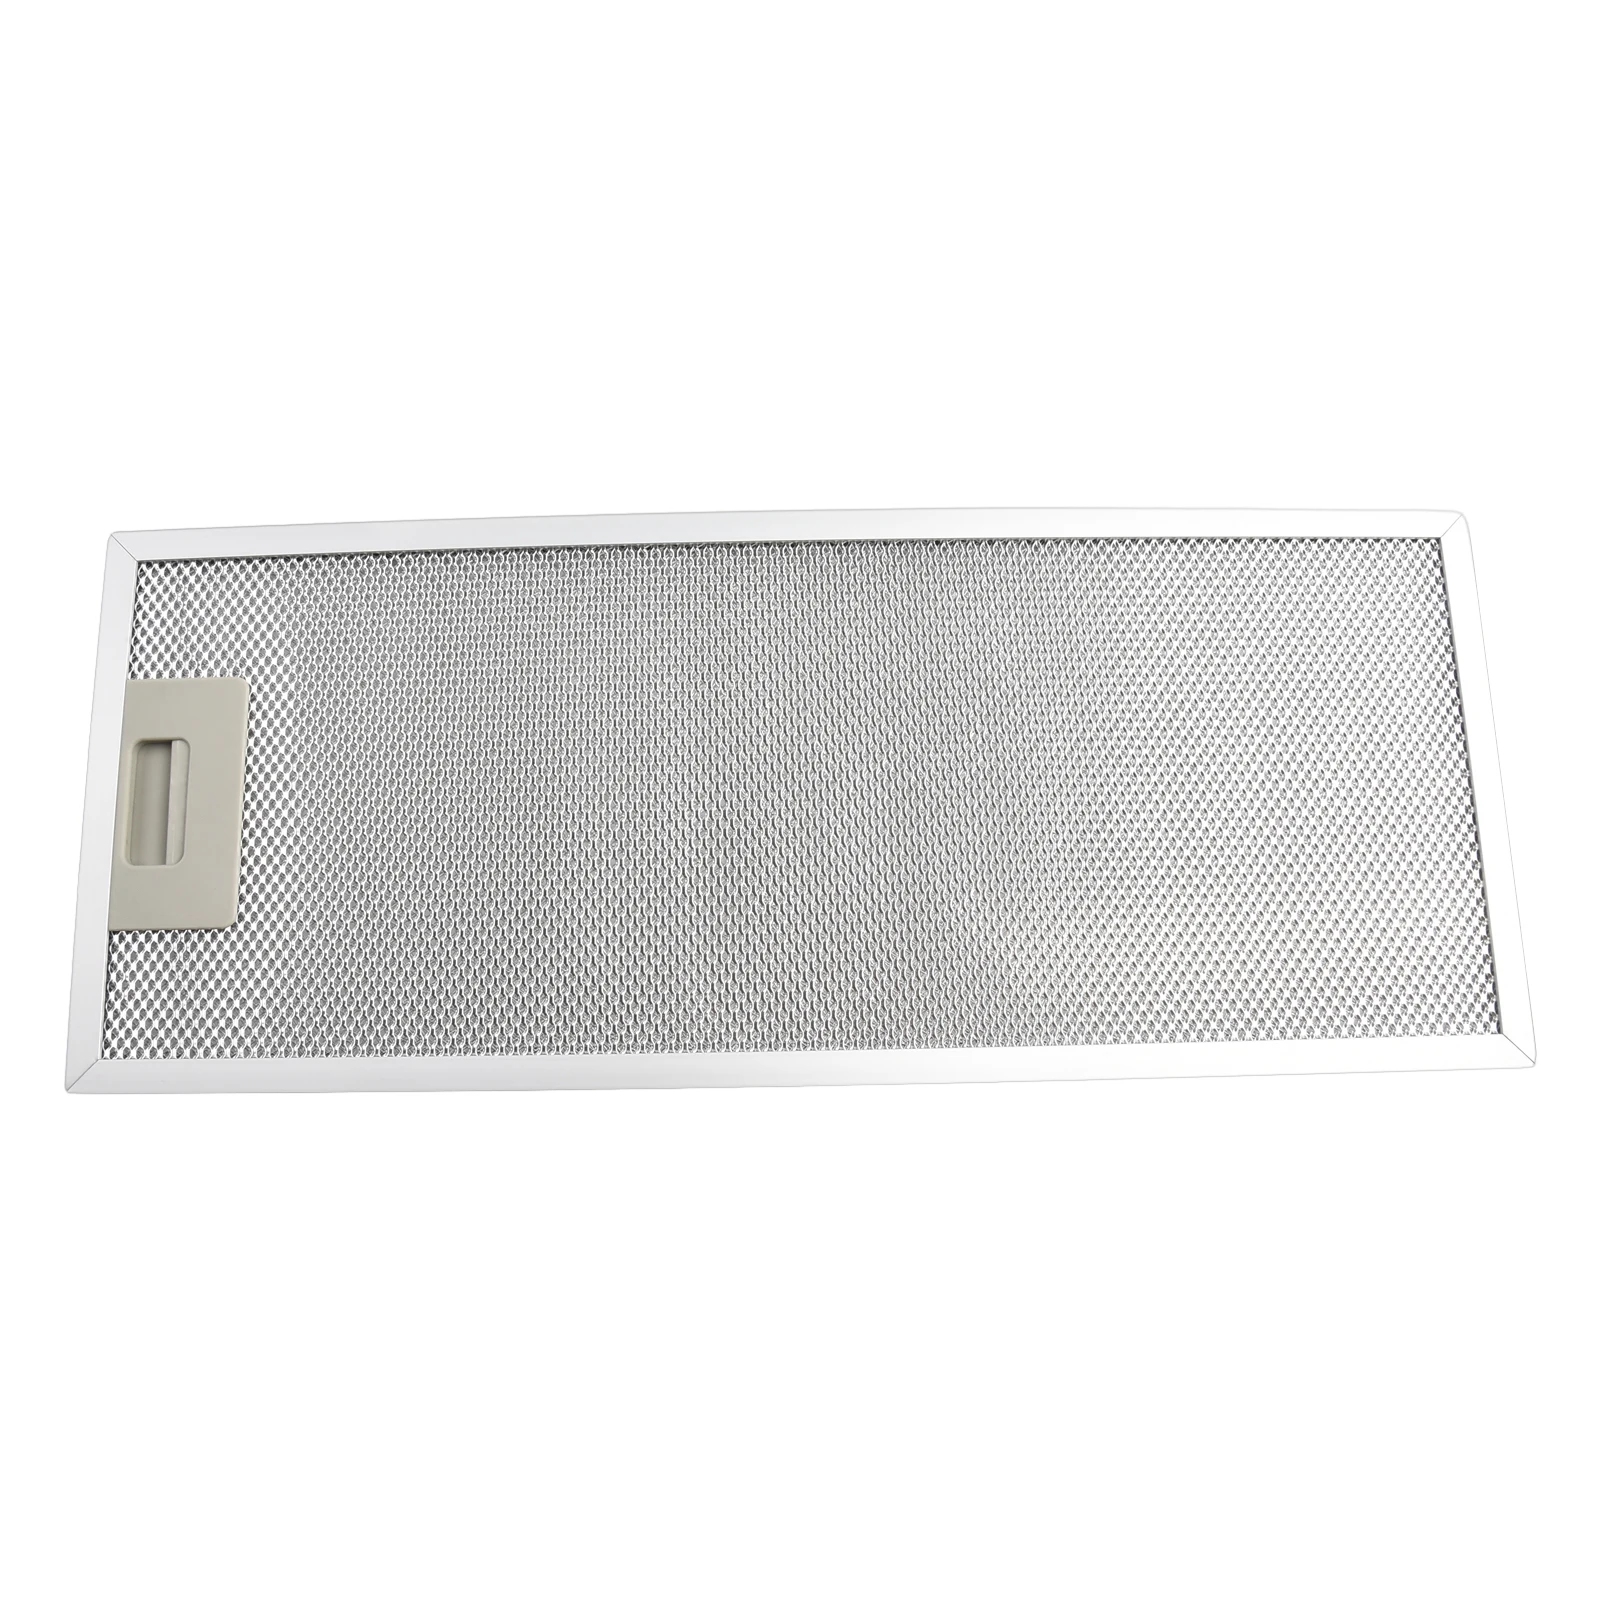 1pcs Filter Replaceable Silver Cooker Hood Filters Metal Mesh Extractor Vent Filter 192 X 470 X 9mm Effortless Maintenance